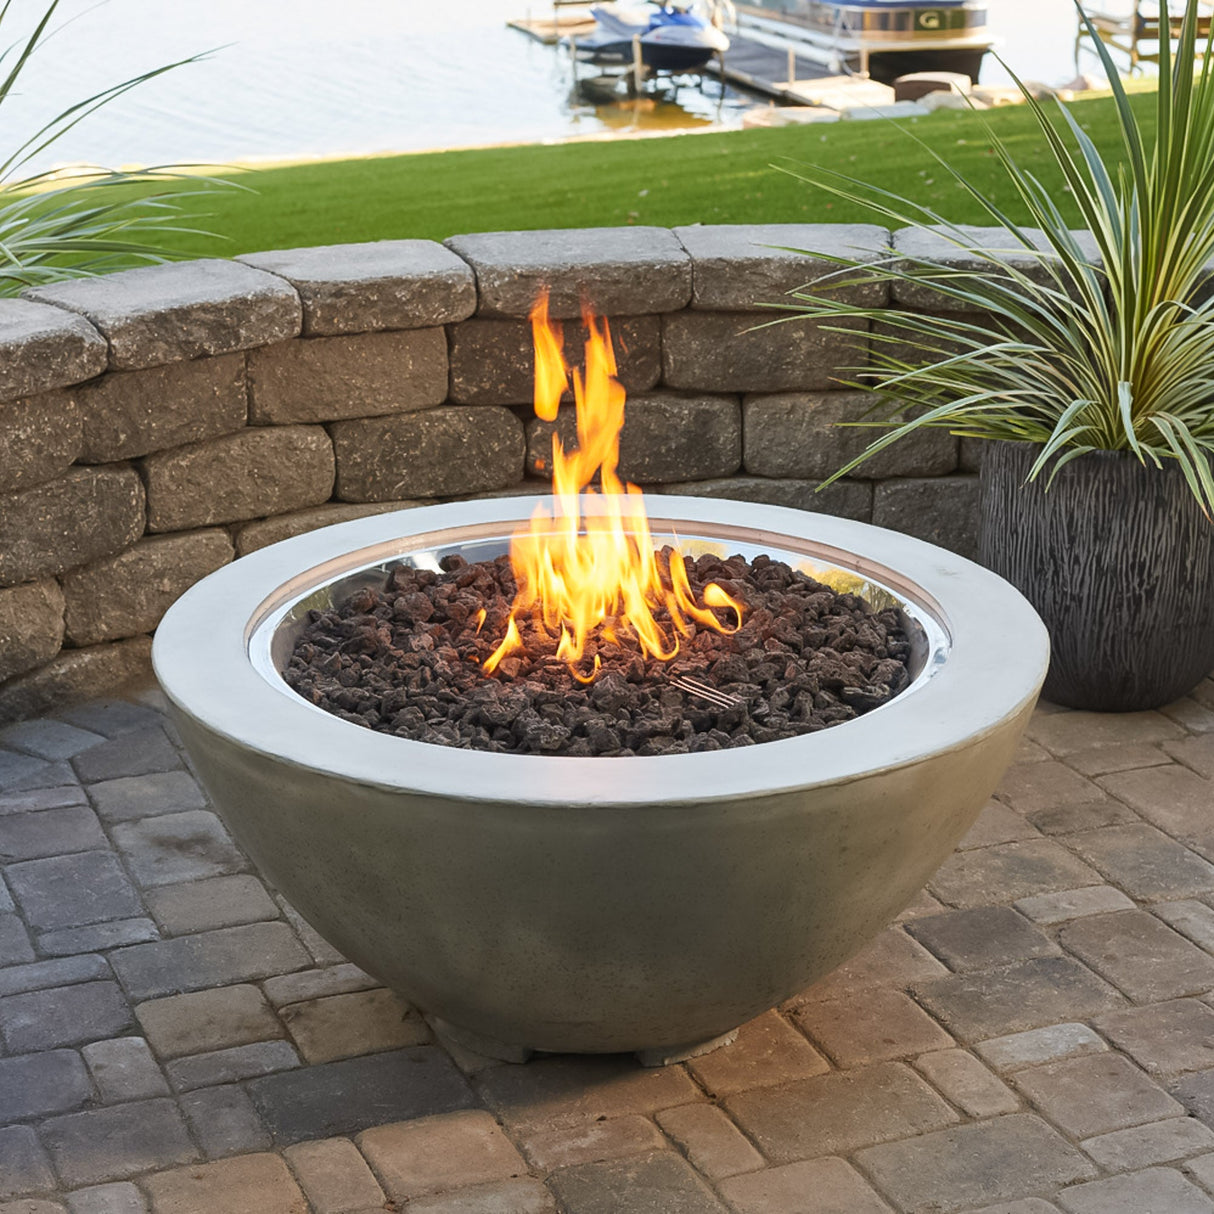 A Natural Grey Cove Round Gas Fire Pit Bowl 42" next a lake on a patio setting